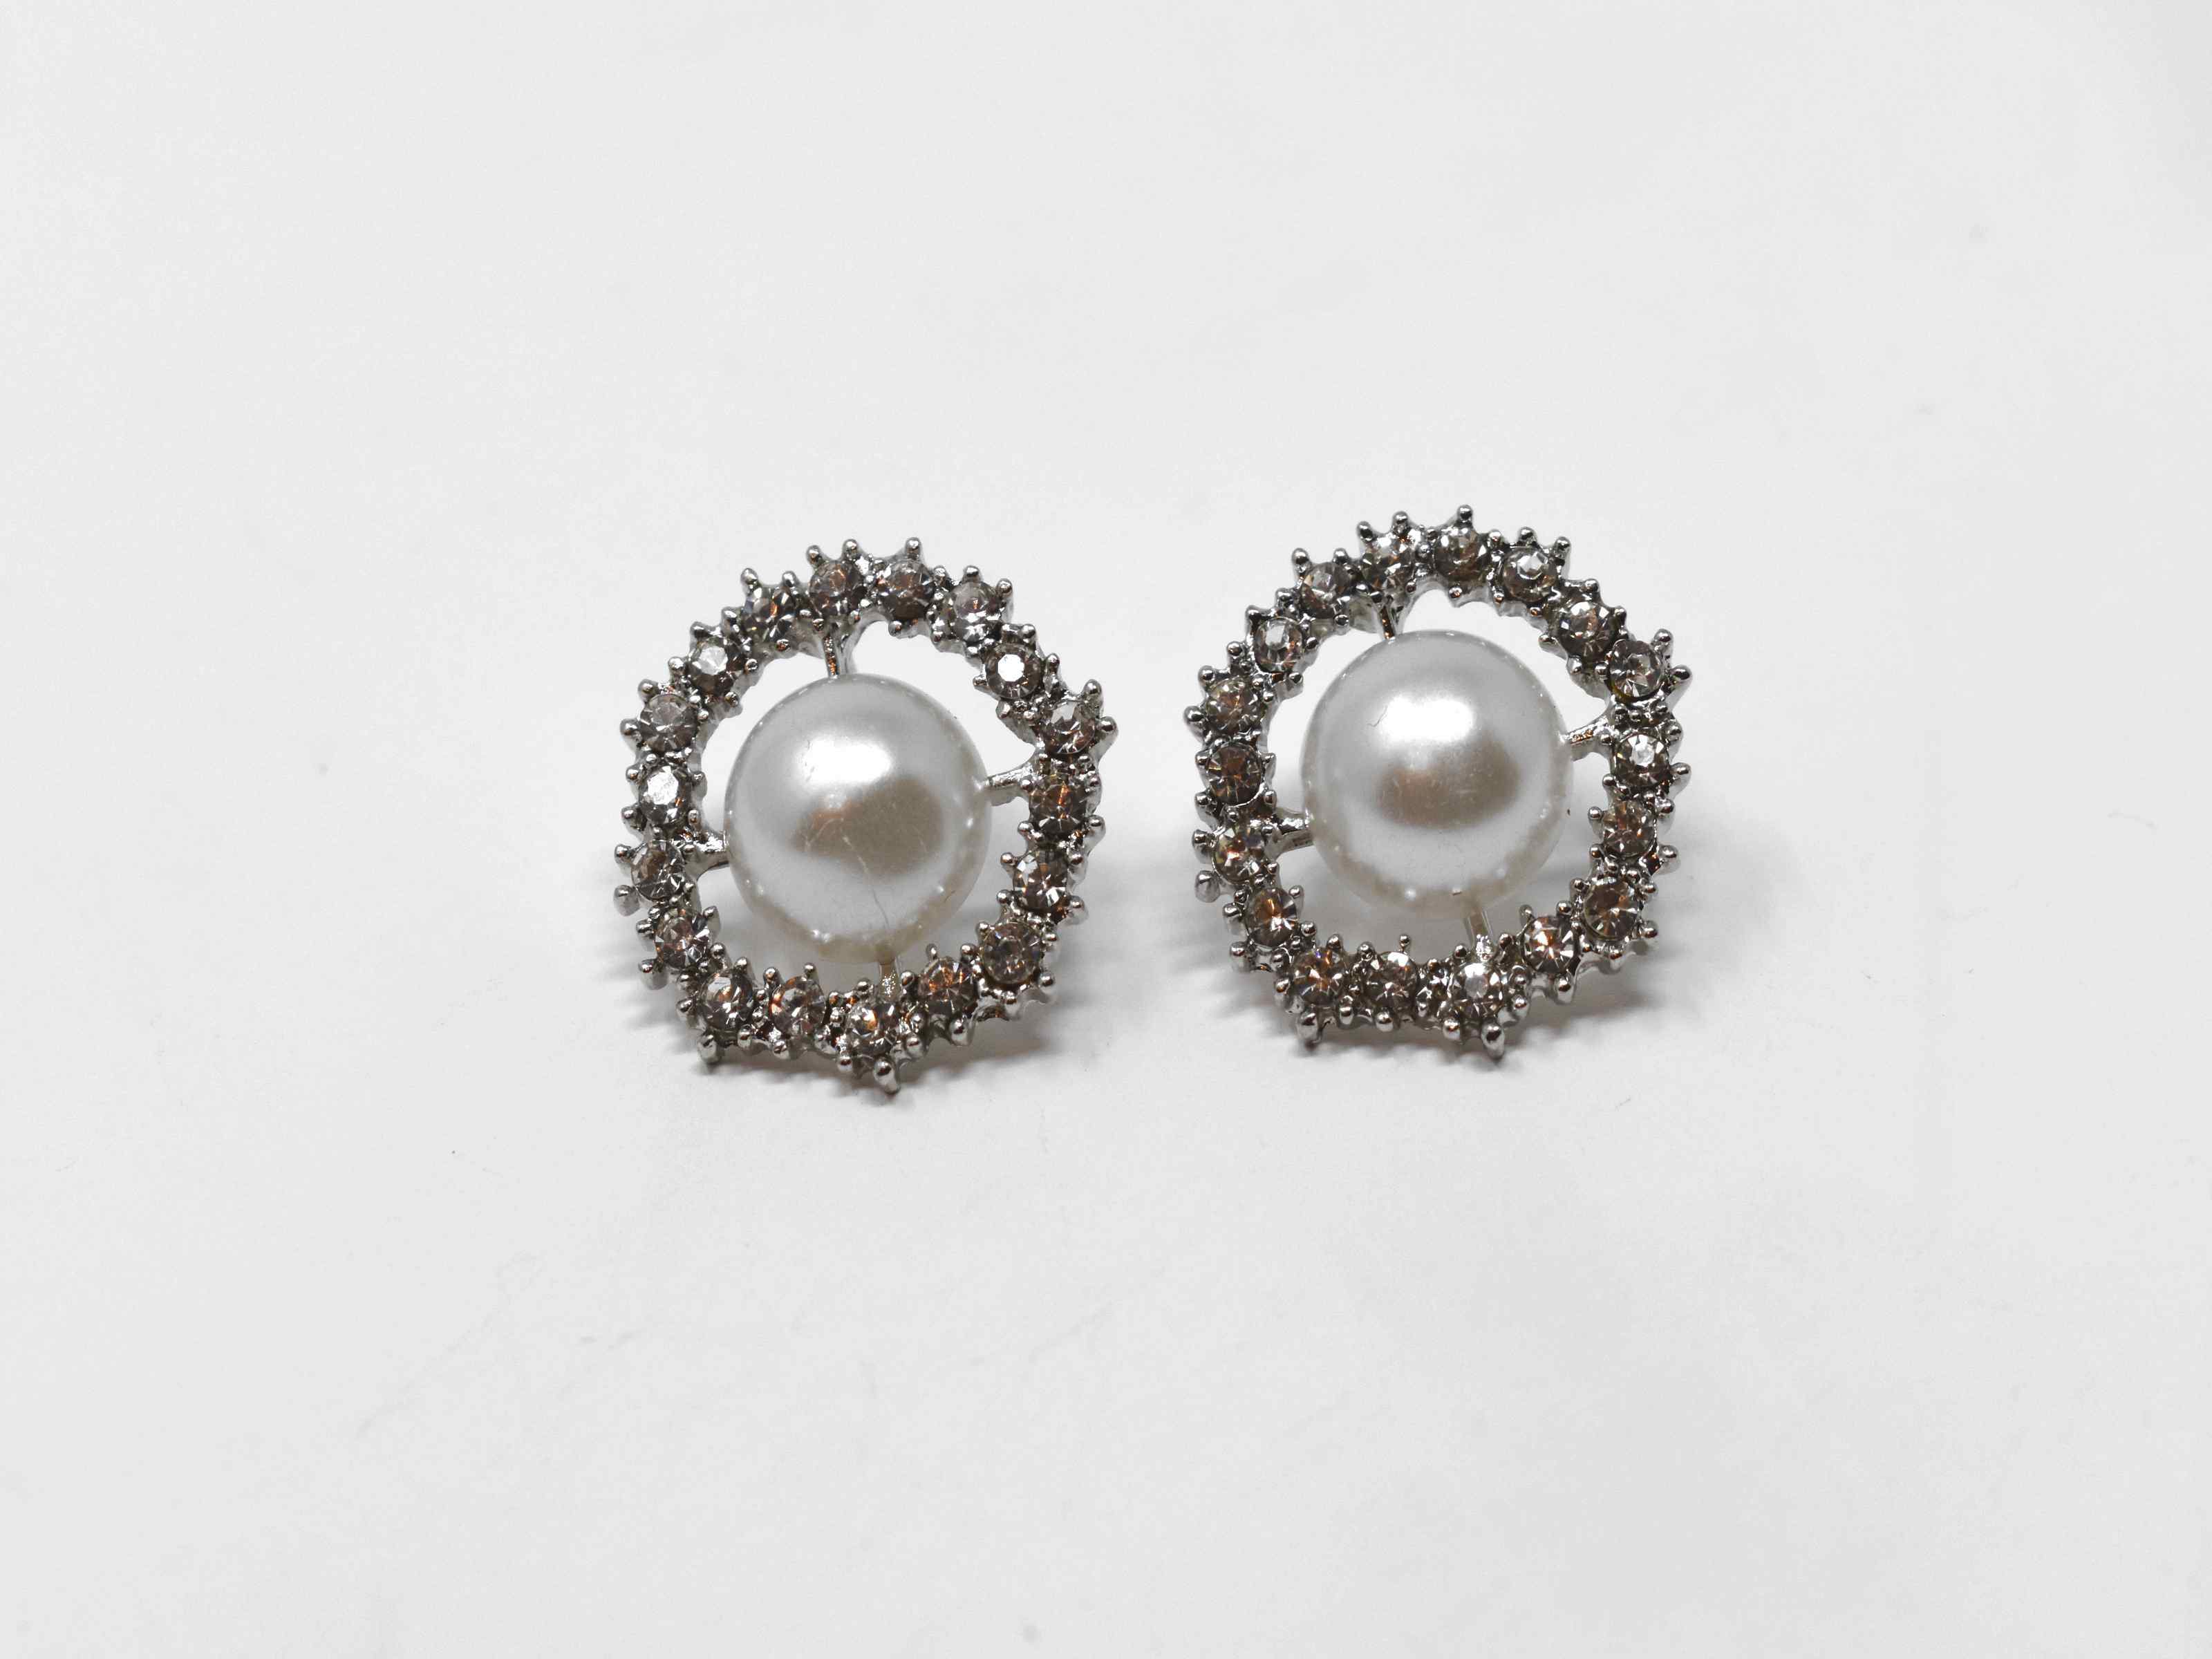 Our dietes earrings are a must have staple with a burst of sparkle. These earrings are a silver tone with a pearl core surrounded by a beautiful halo of stones. They are 3/4 inches in length with a push back clasp.